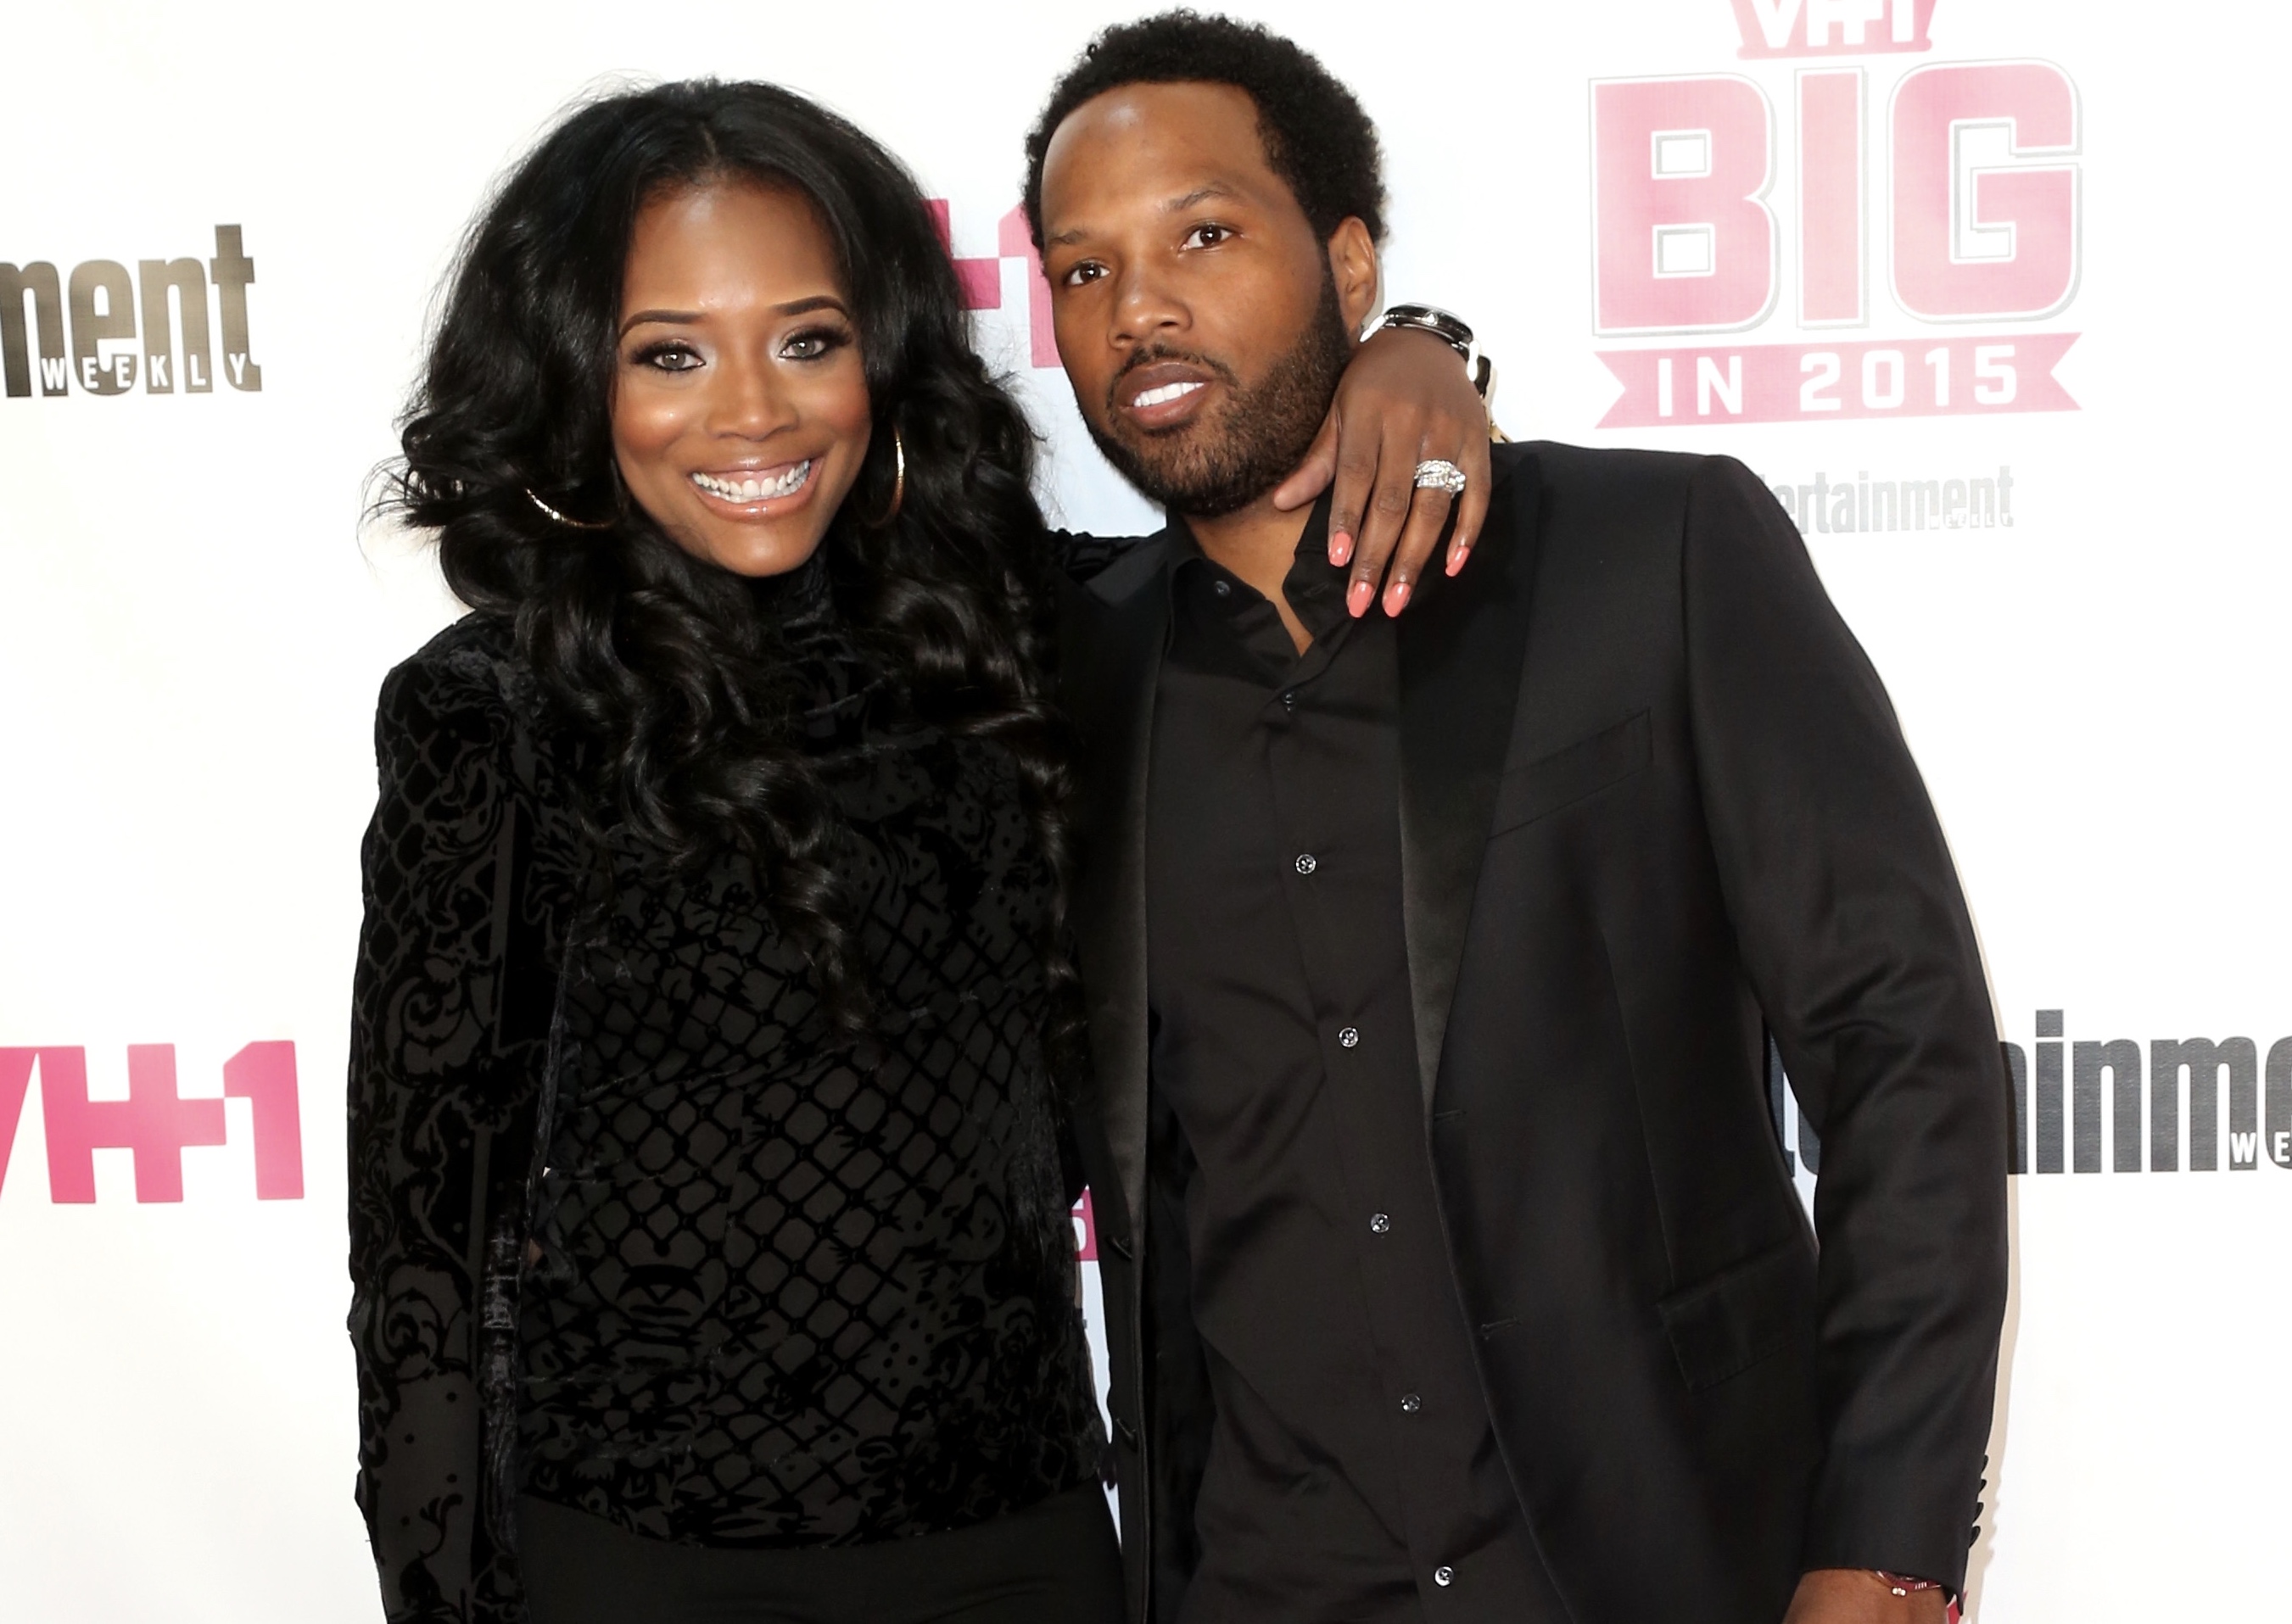 Mendeecees Harris is facing backlash after telling his wife Yandy Smith "I don't know" when asked if he'd hold her down if their roles were reversed.